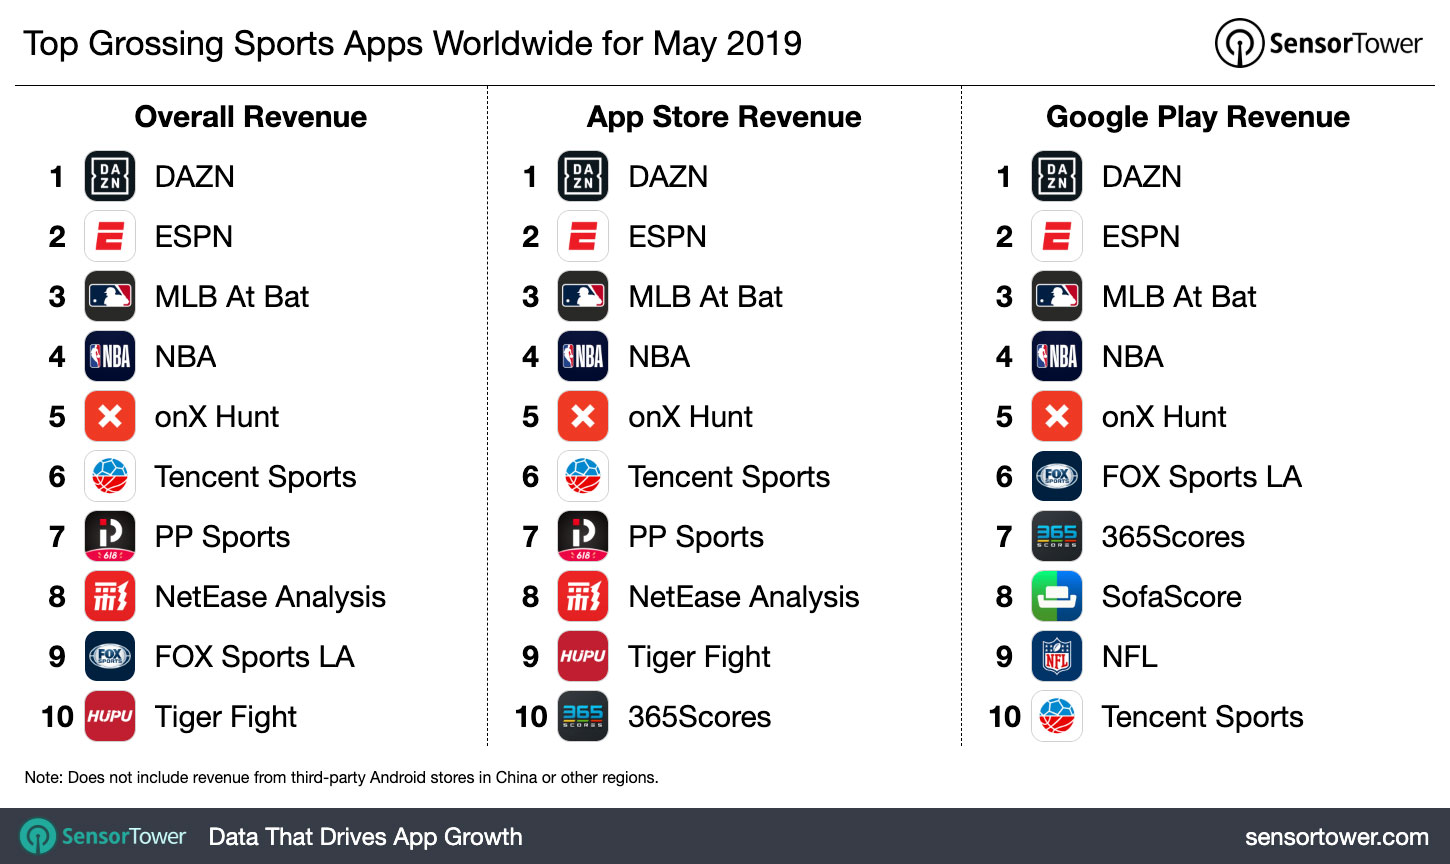 Top Grossing Sports Apps Worldwide for May 2019